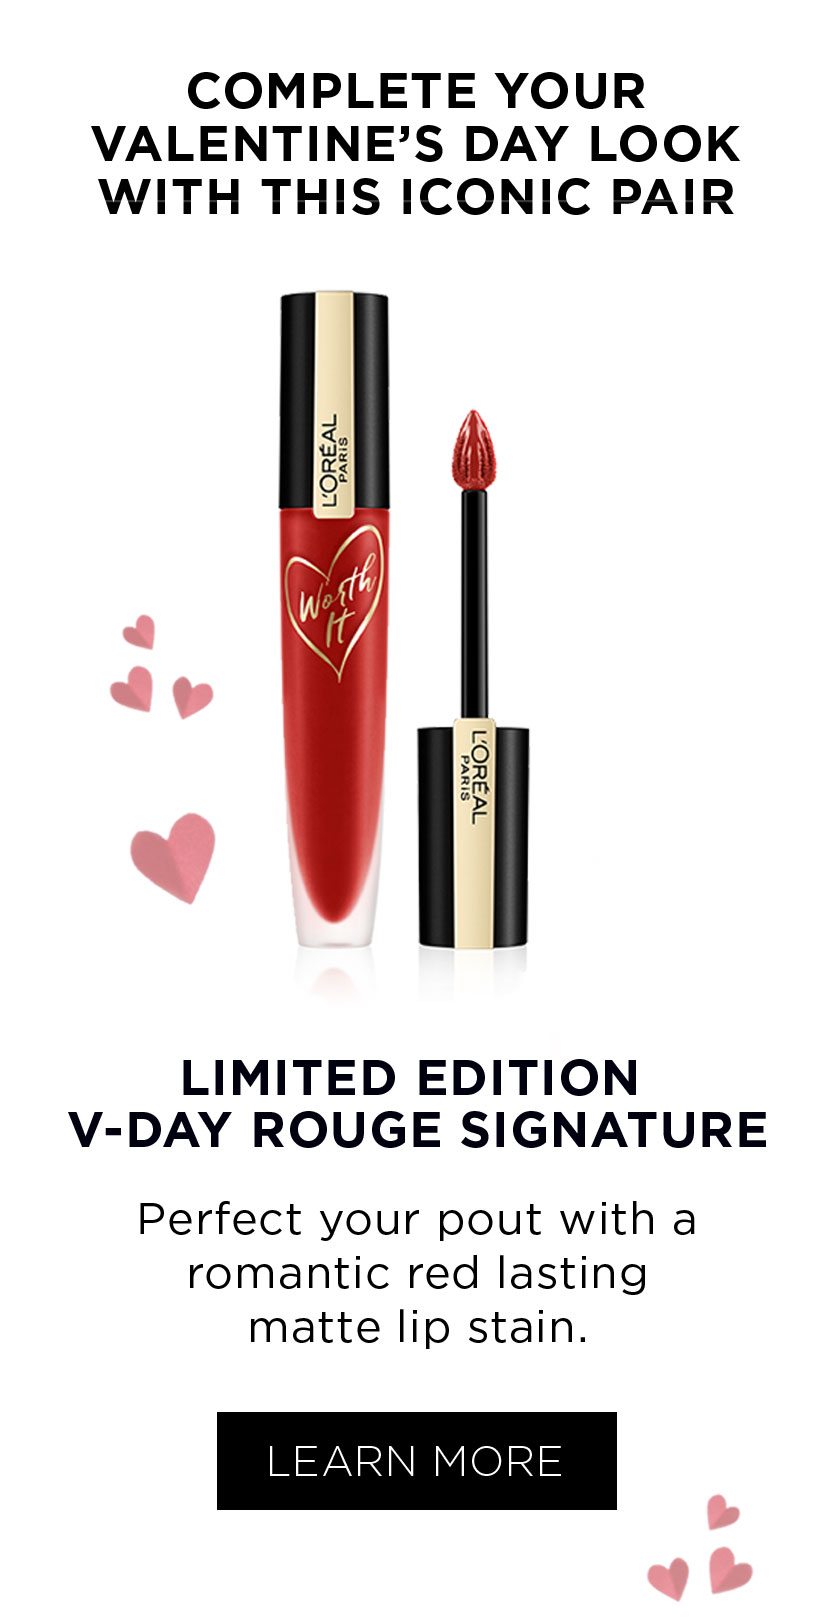 COMPLETE YOUR VALENTINE’S DAY LOOK WITH THIS ICONIC PAIR - LIMITED EDITION V-DAY ROUGE SIGNATURE - LEARN MORE